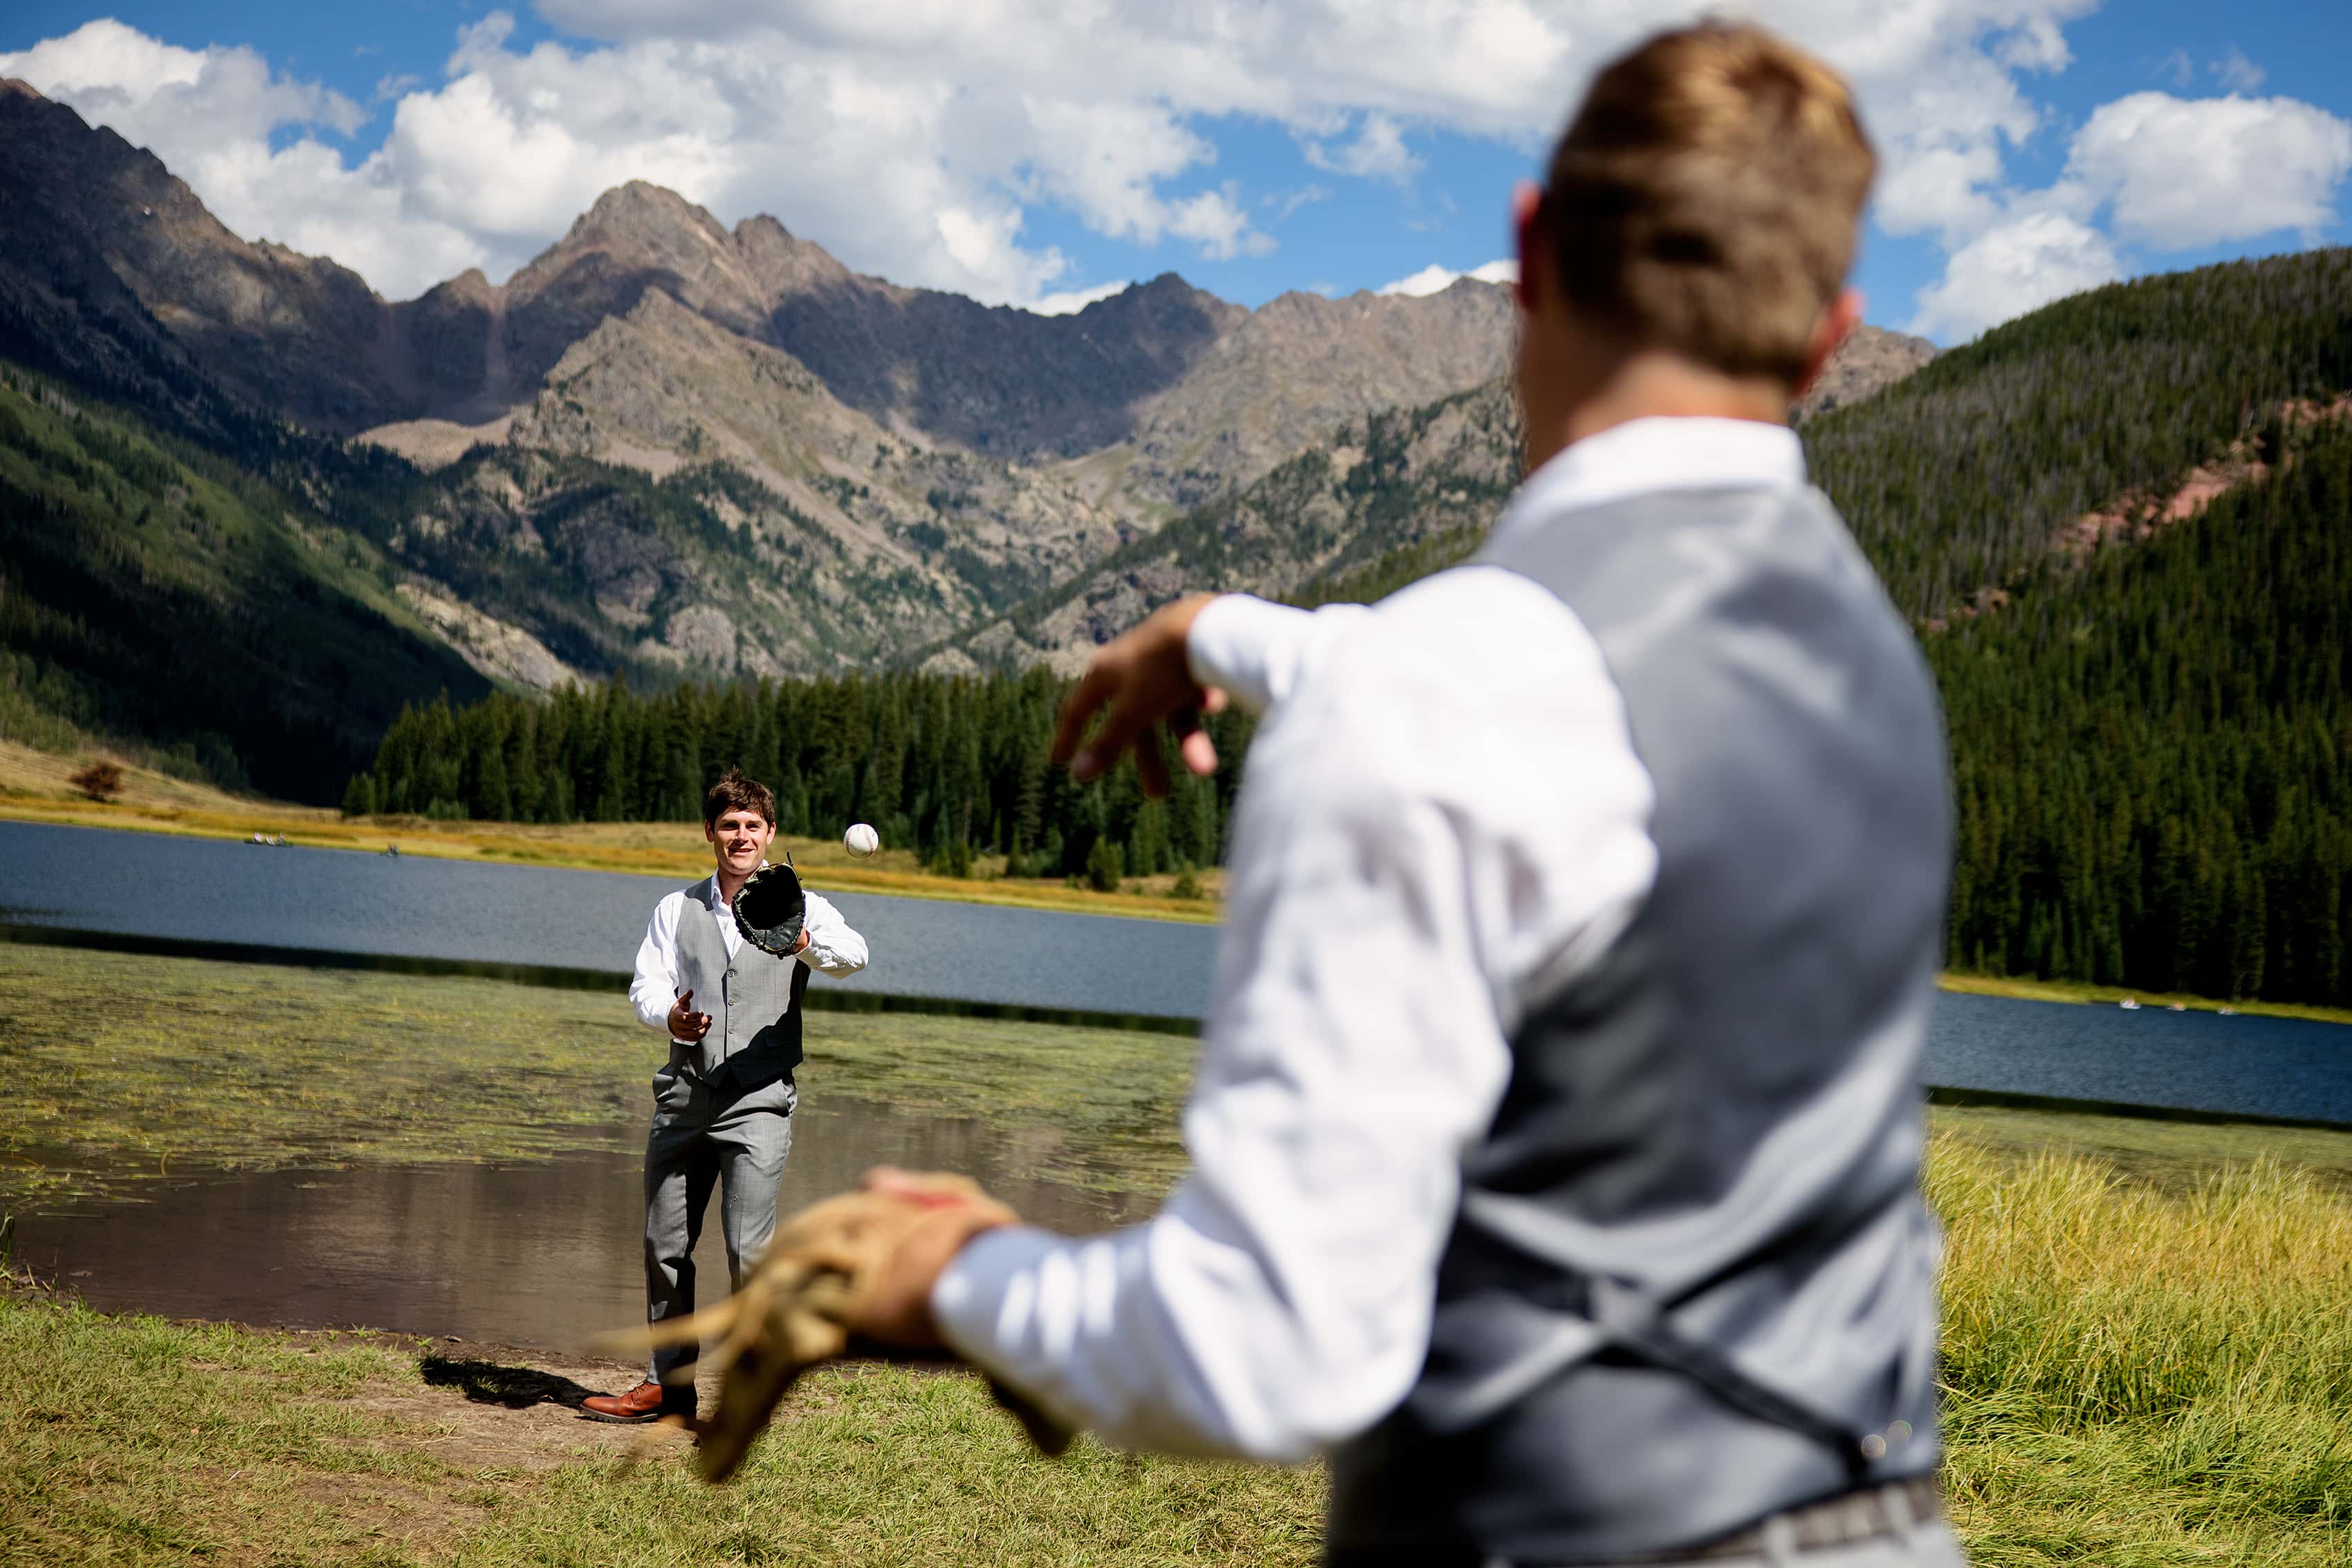 The groom plays catch near the water’s edge with a groomsman at Piney Lake on his wedding day